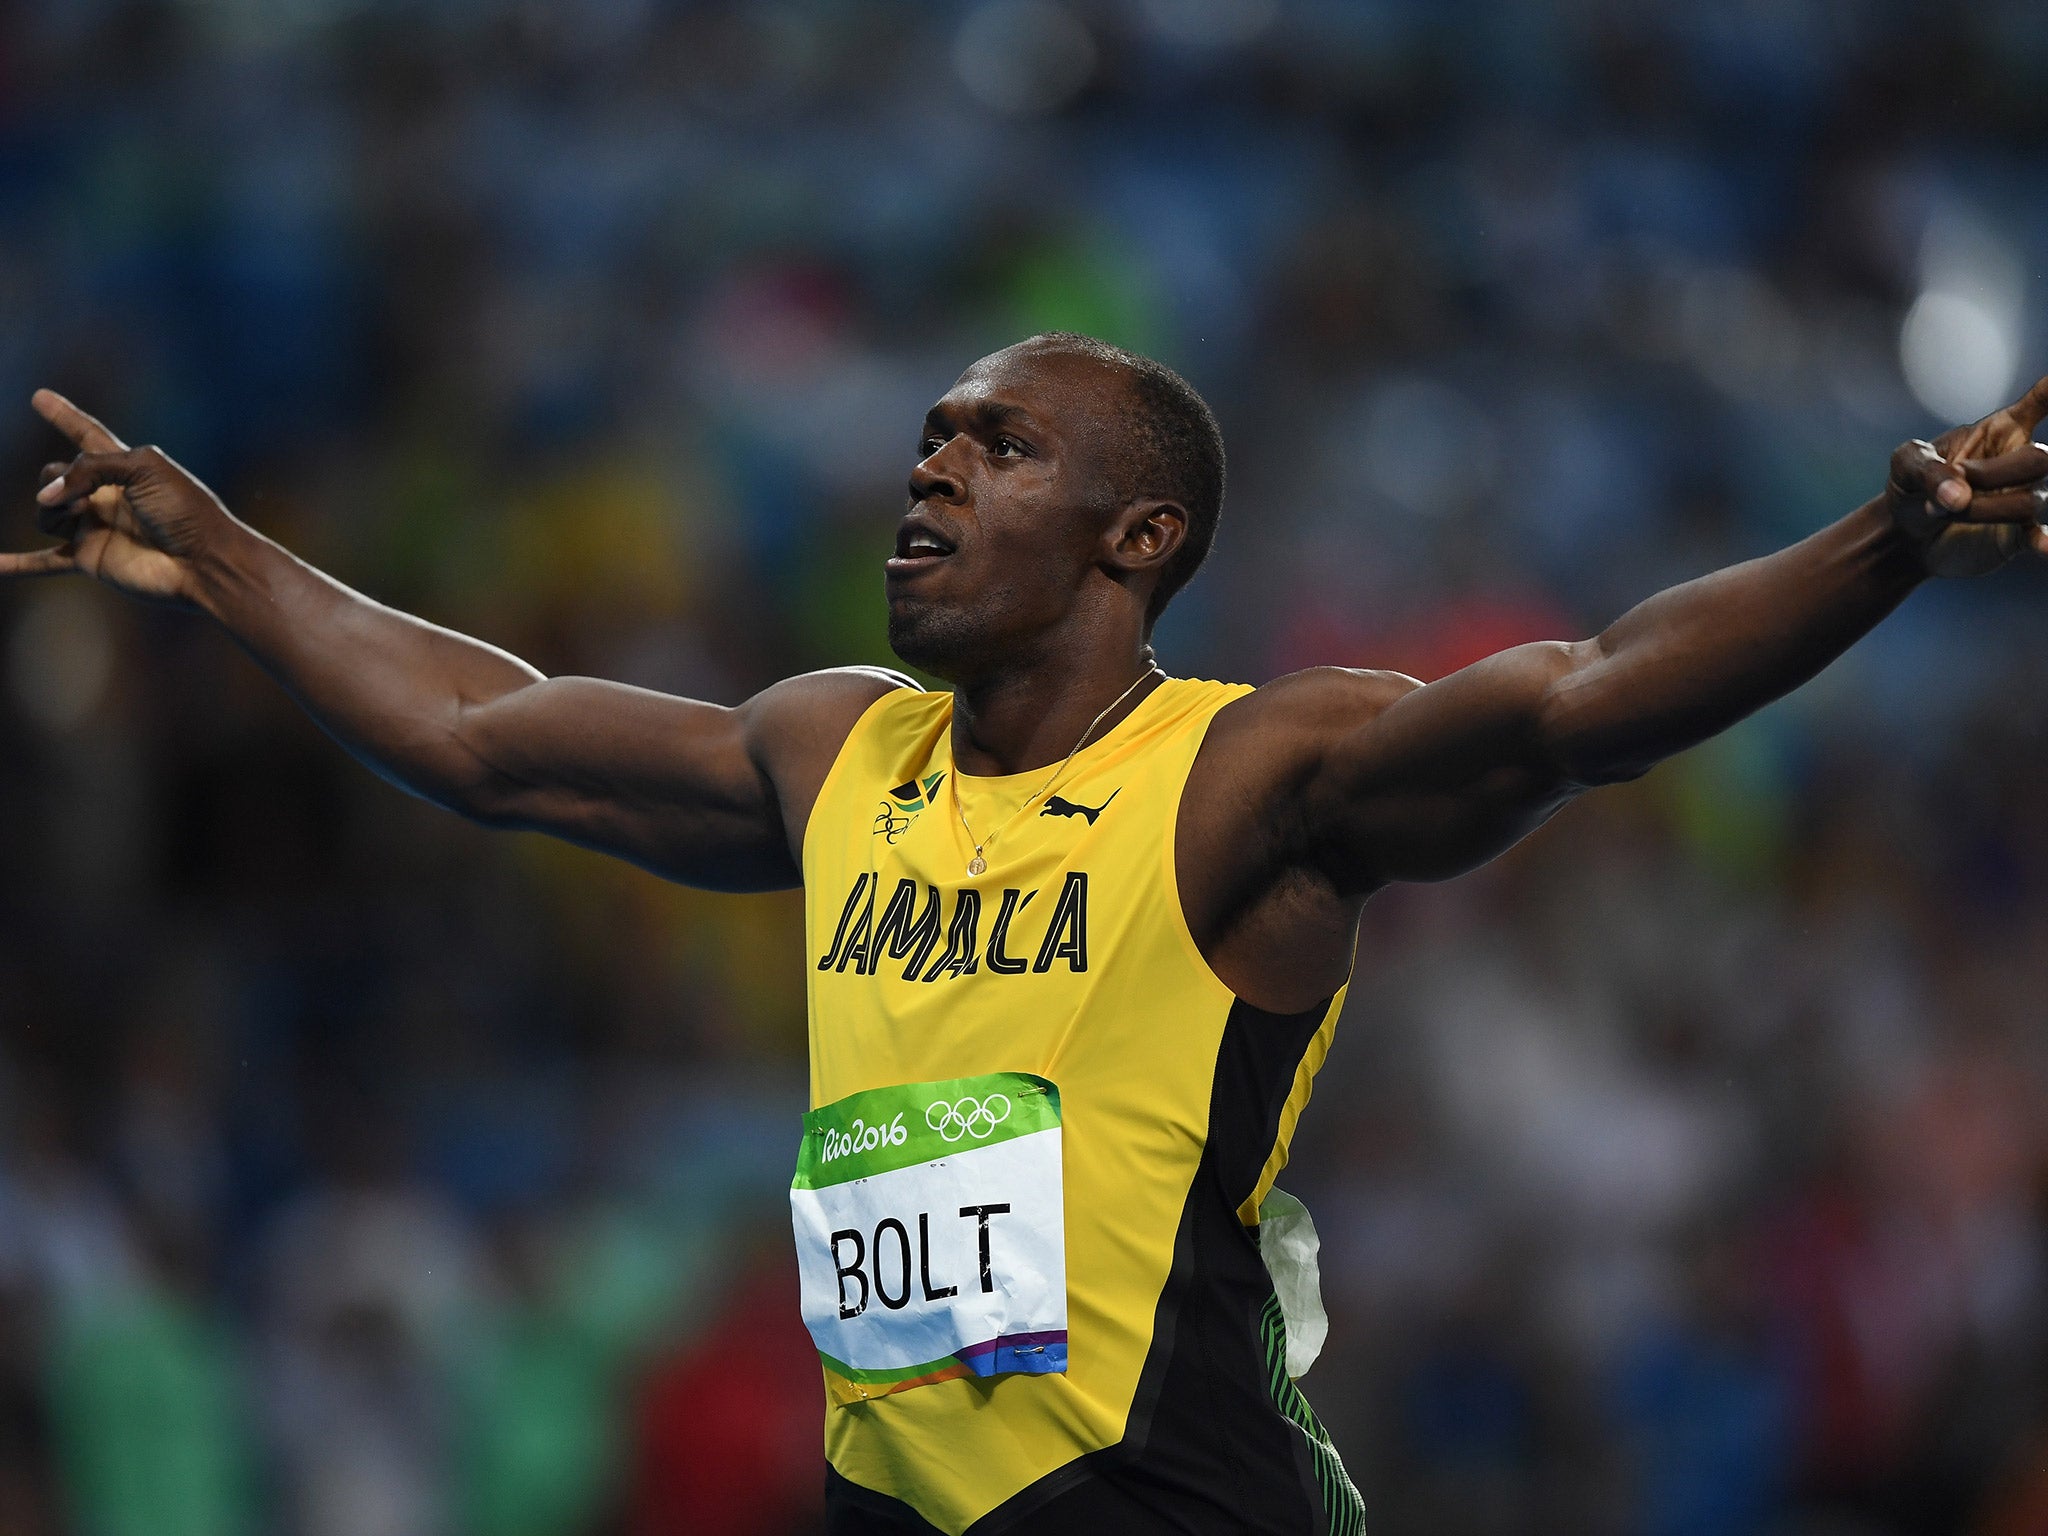 Usain Bolt celebrates victory in the men's 200m Olympic final